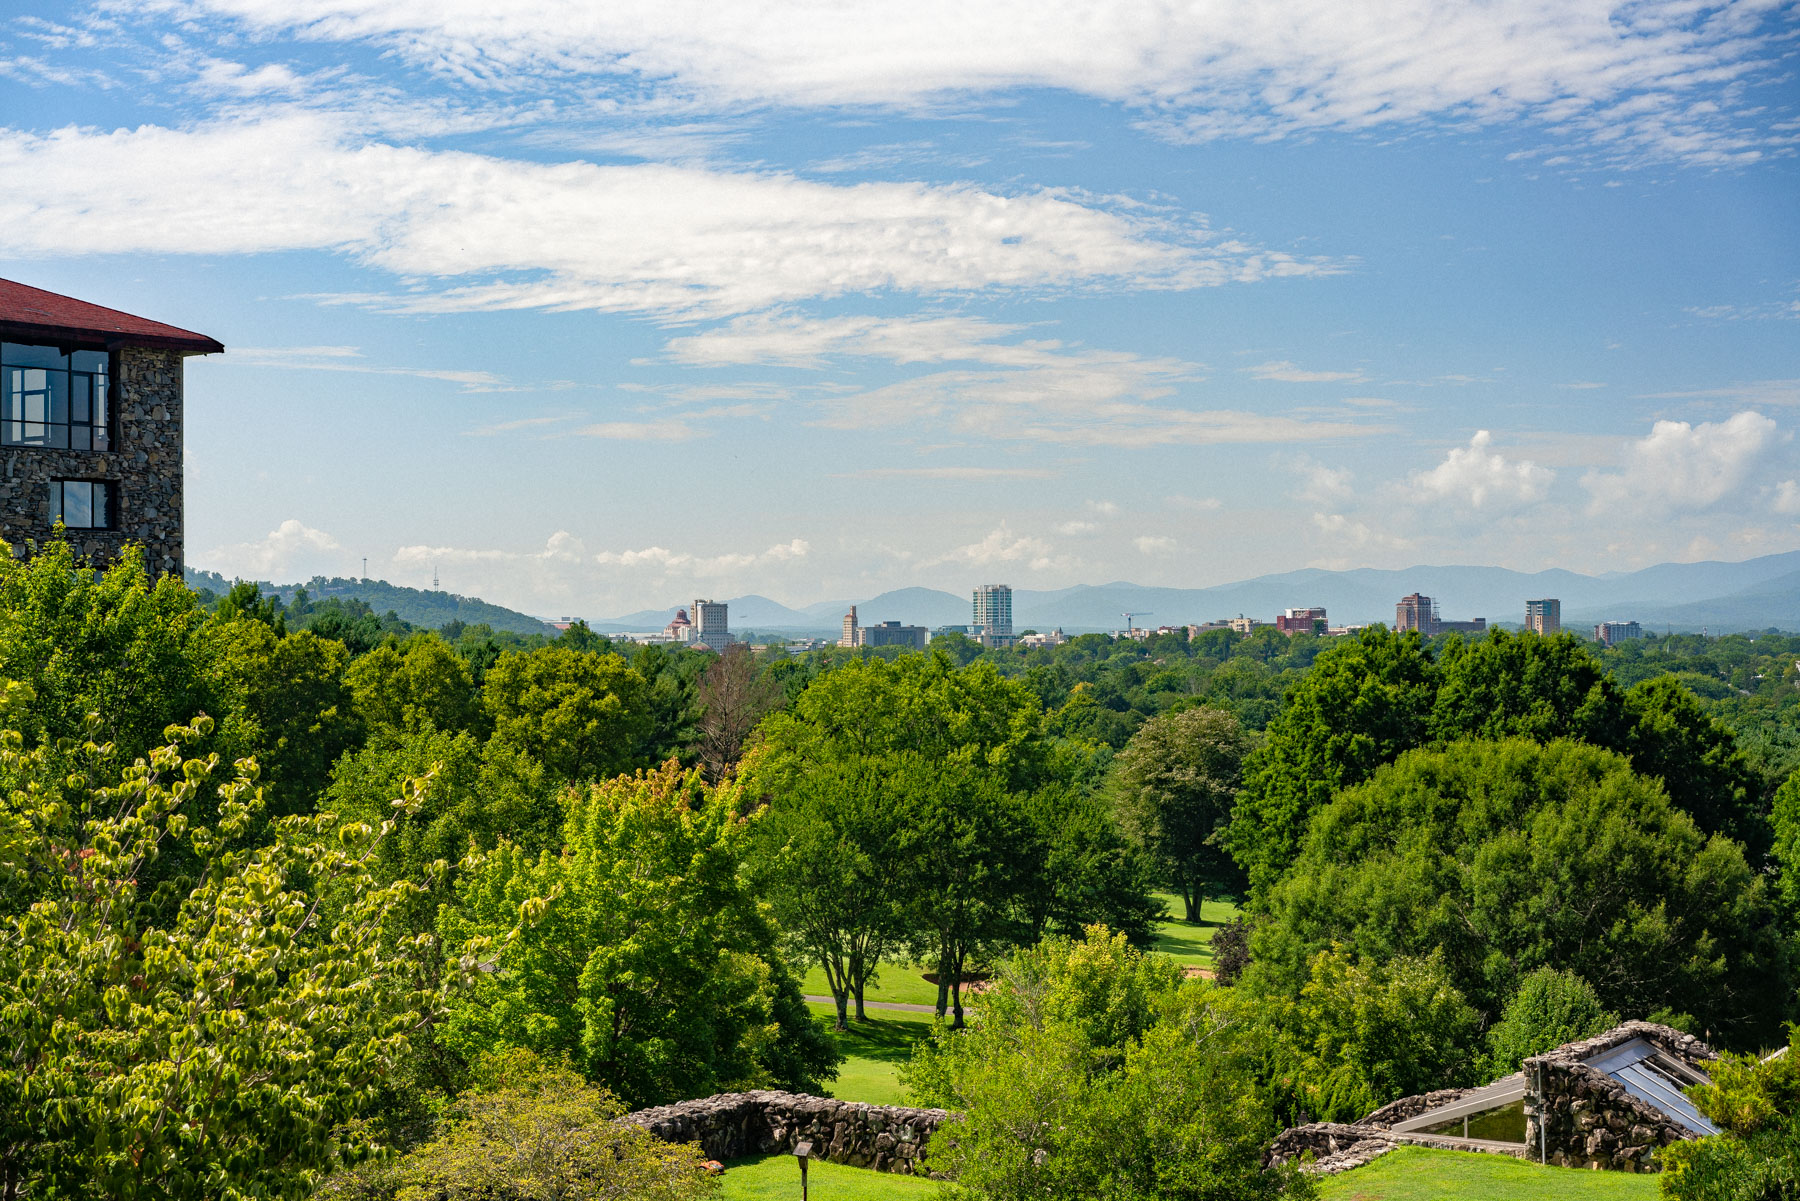 Pros and cons of living in Asheville North Carolina